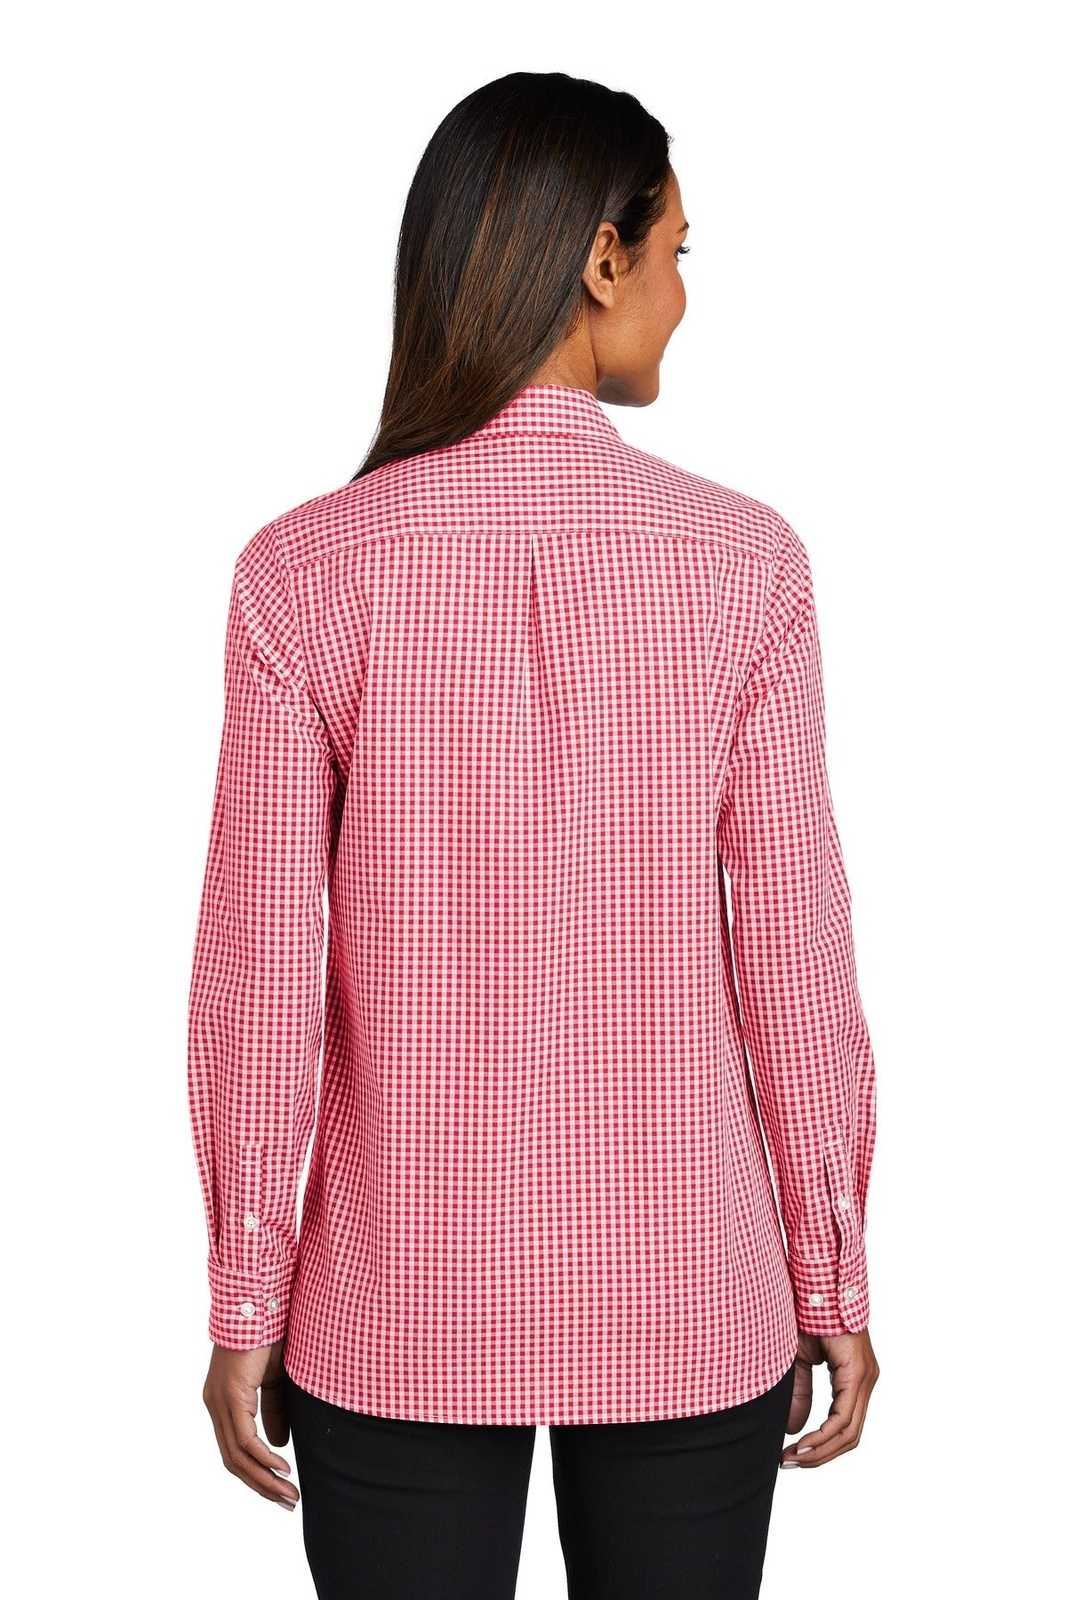 Port Authority LW644 Ladies Broadcloth Gingham Easy Care Shirt - Rich Red White - HIT a Double - 2